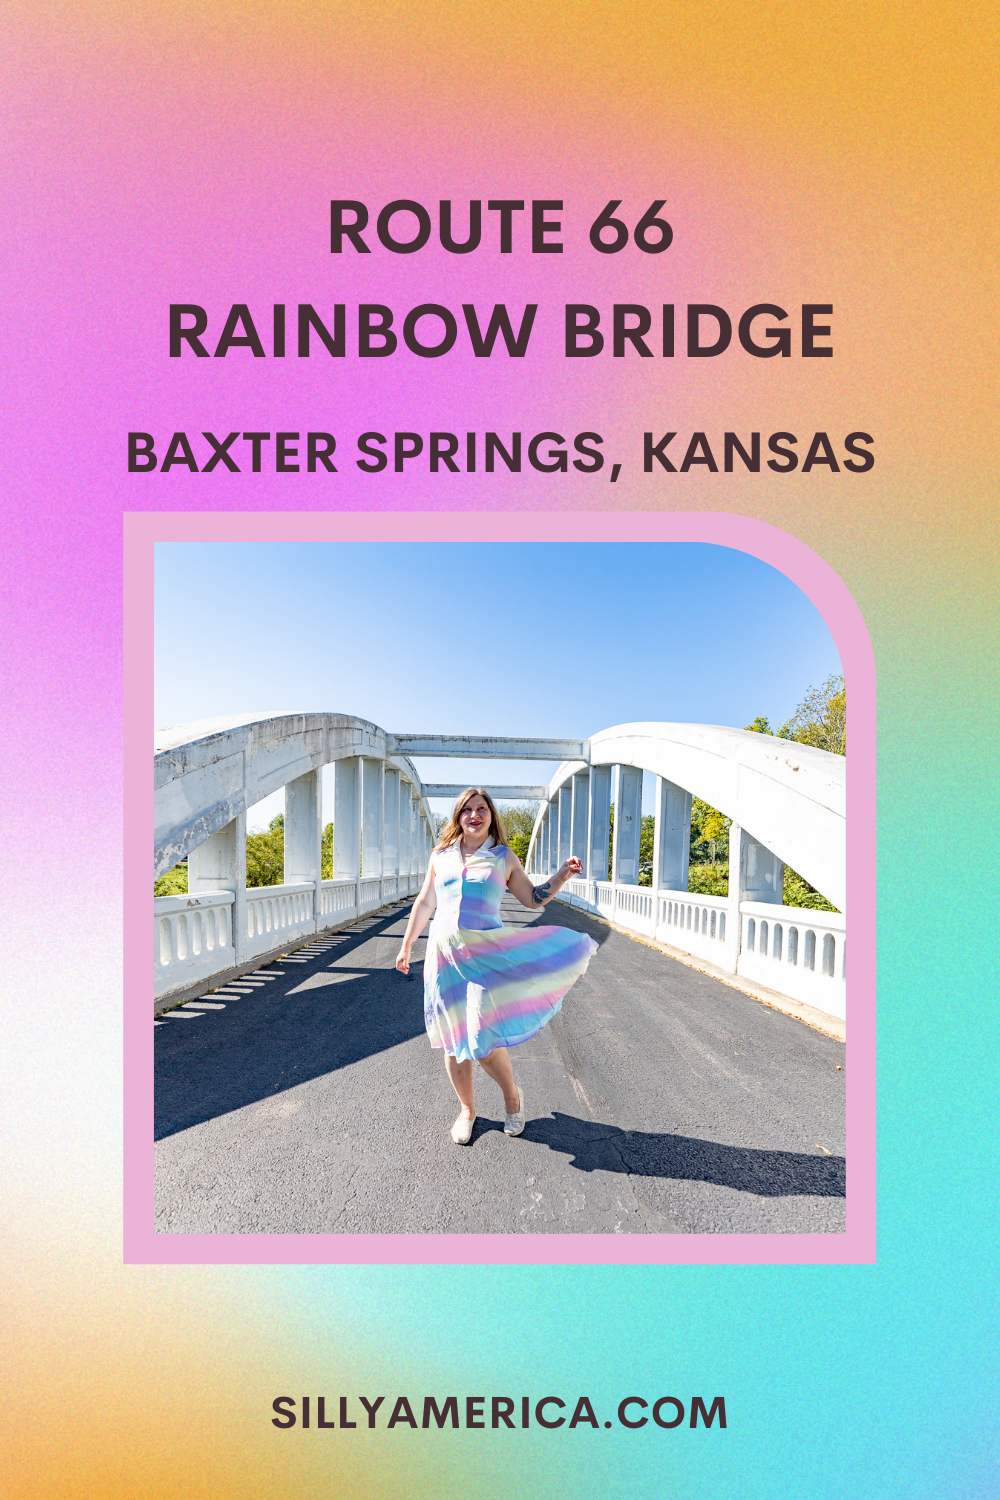 When Dorothy said she wanted to go somewhere over the rainbow, she might just have been talking about this Kansas Route 66 attraction. The Rainbow Bridge in Baxter Springs, Kansas. This is the only bridge of this type left on historic Route 66.  #RoadTrips #RoadTripStop #Route66 #Route66RoadTrip #KansasRoute66 #Kansas #KansasRoadTrip #KansasRoadsideAttractions #RoadsideAttractions #RoadsideAttraction #RoadsideAmerica #RoadTrip